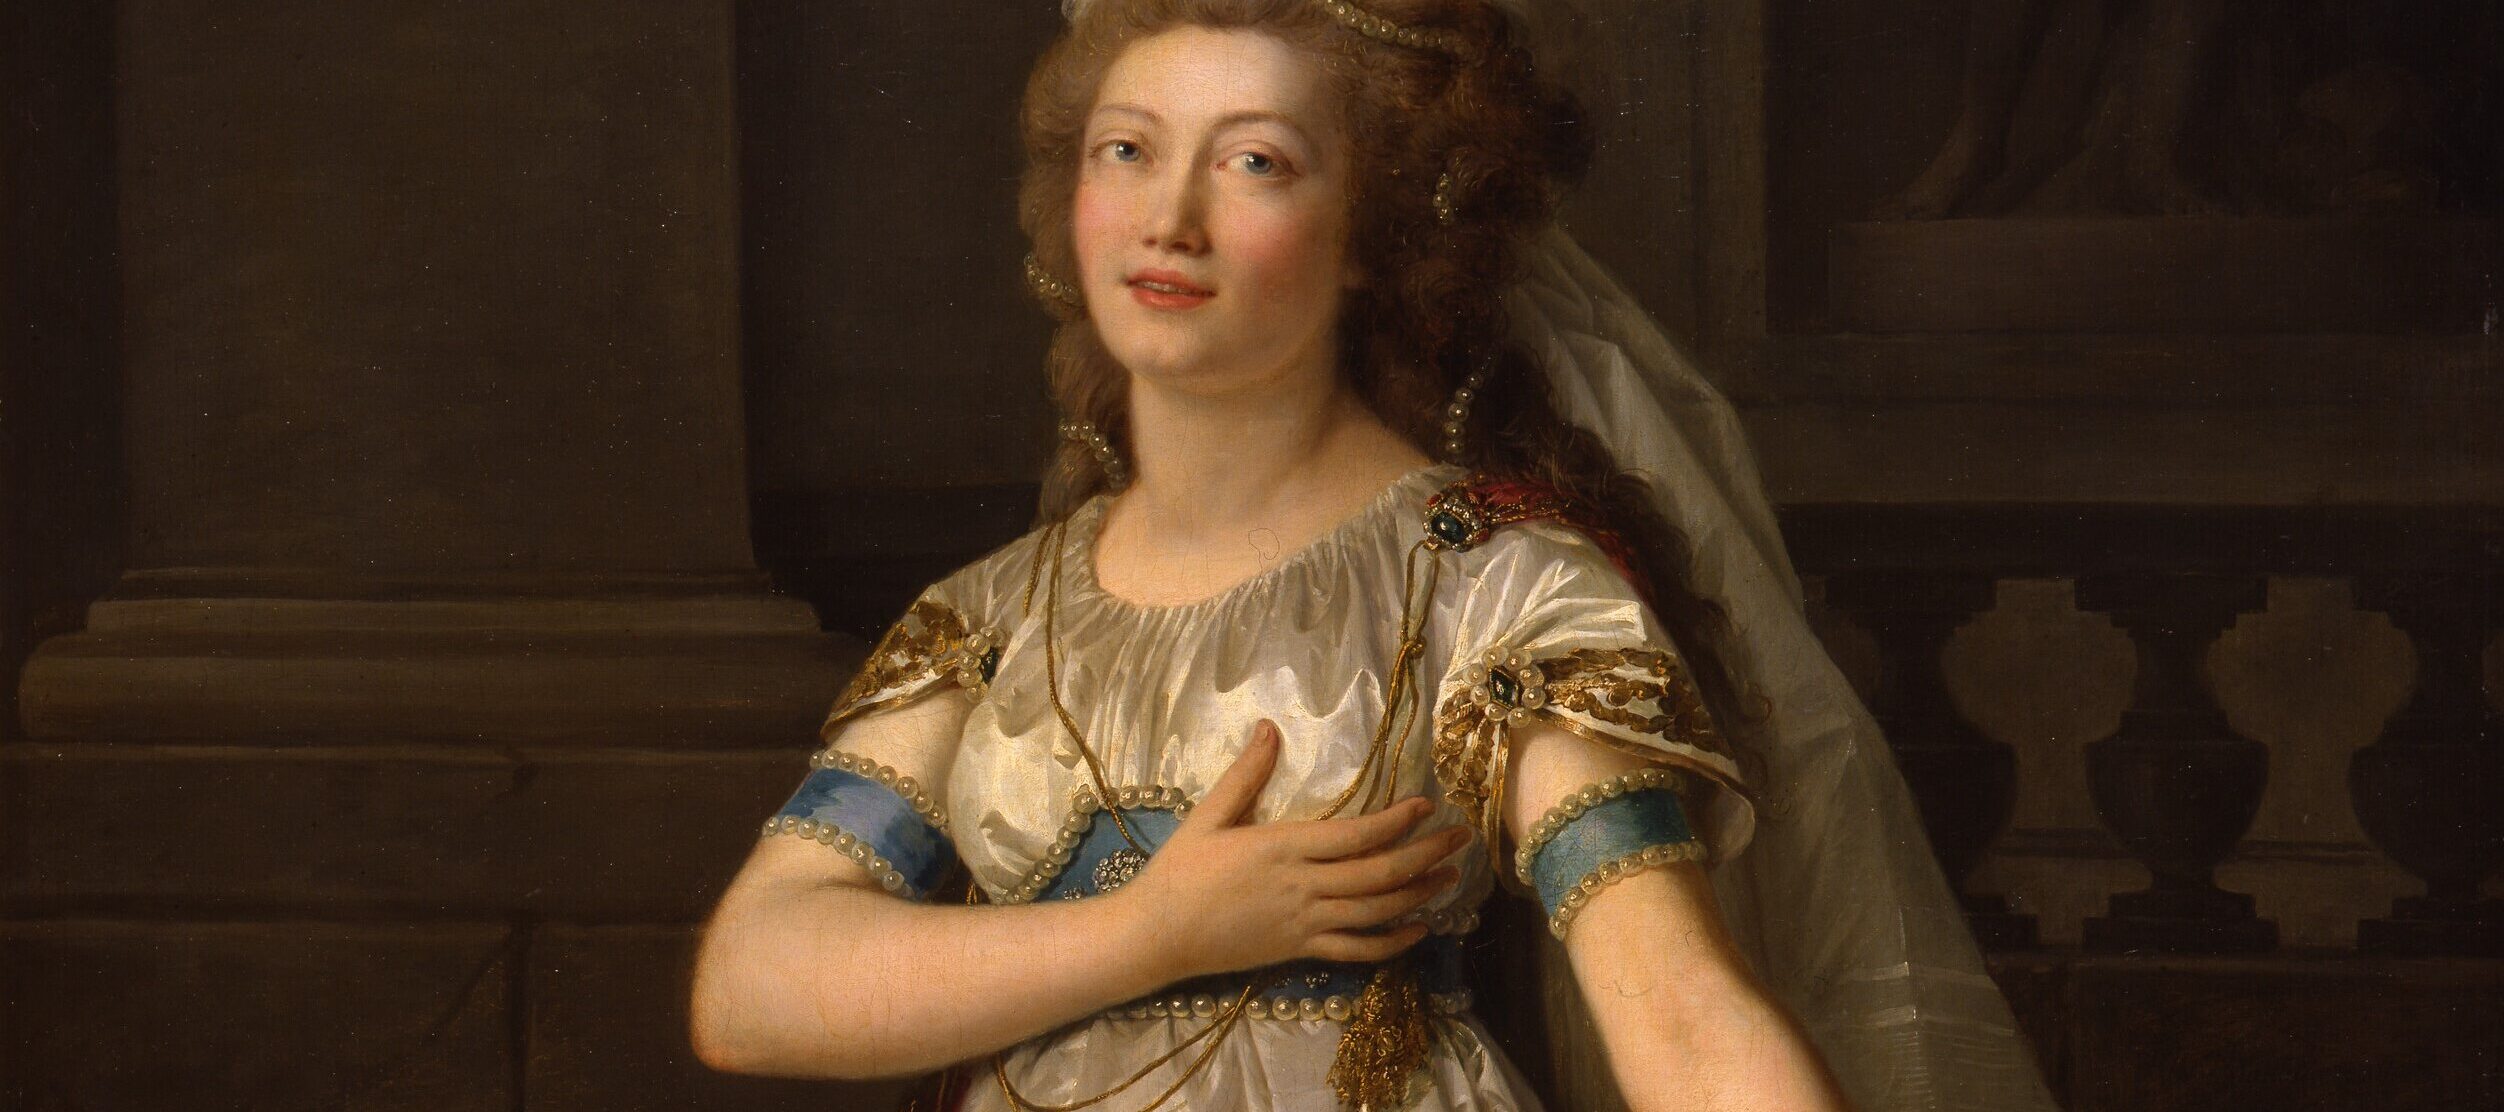 Realistic painting of a light-skinned woman with elaborately-coiffed medium-brown hair, gazing at the viewer, wearing a classic white silk dress and red draped cape with gold embellishments, gesturing dramatically with one hand over her heart and the other extended outward.